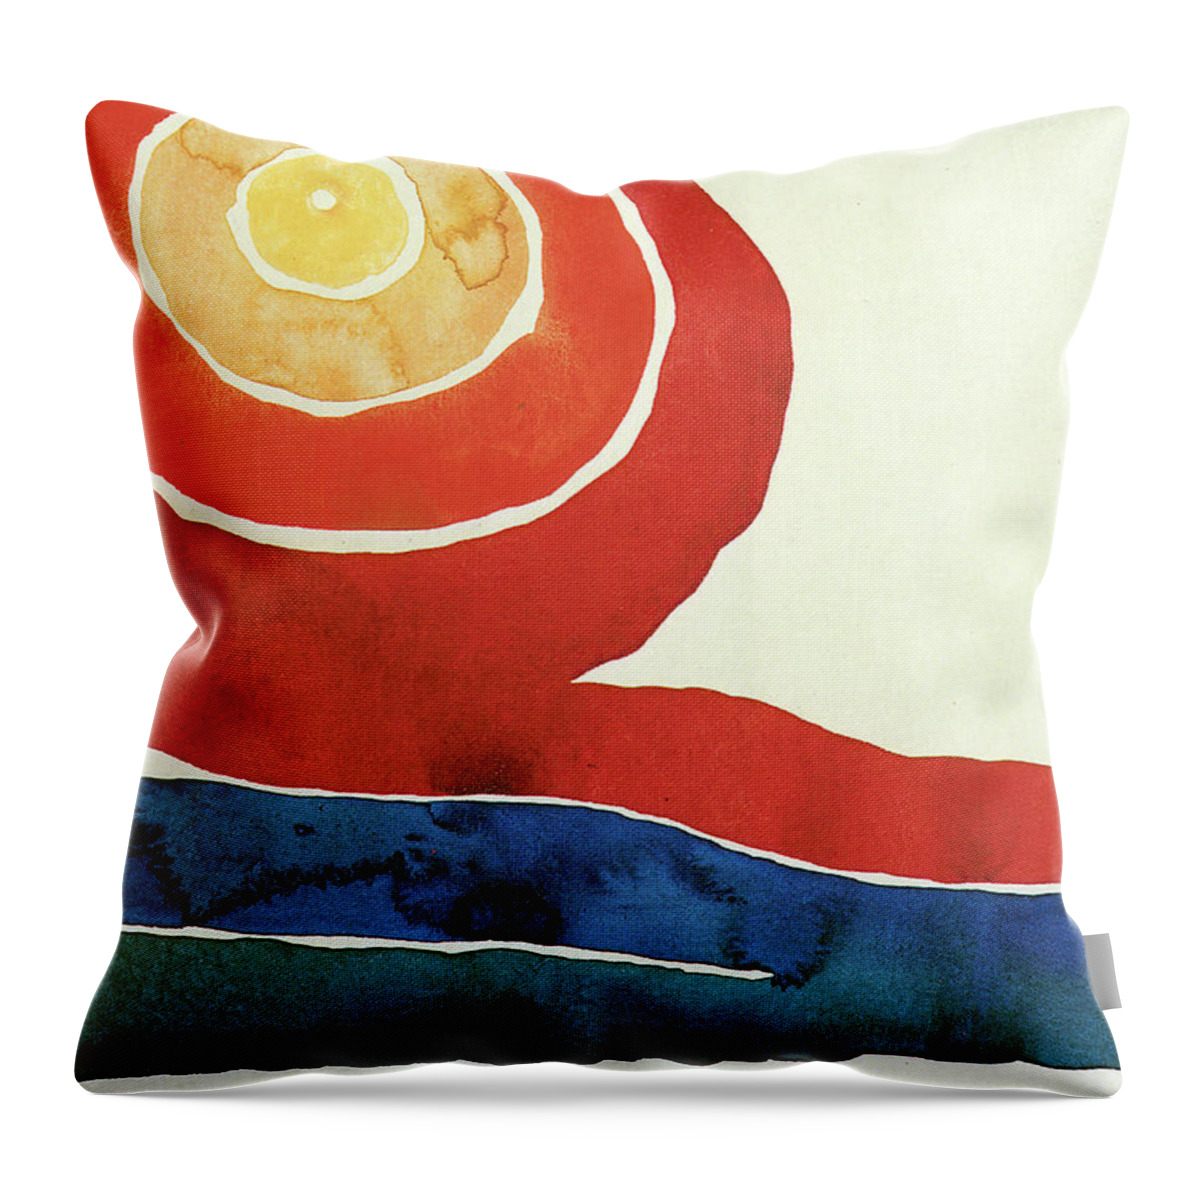 Evening Star Iii Throw Pillow featuring the painting Evening Star III by Georgia O'Keeffe